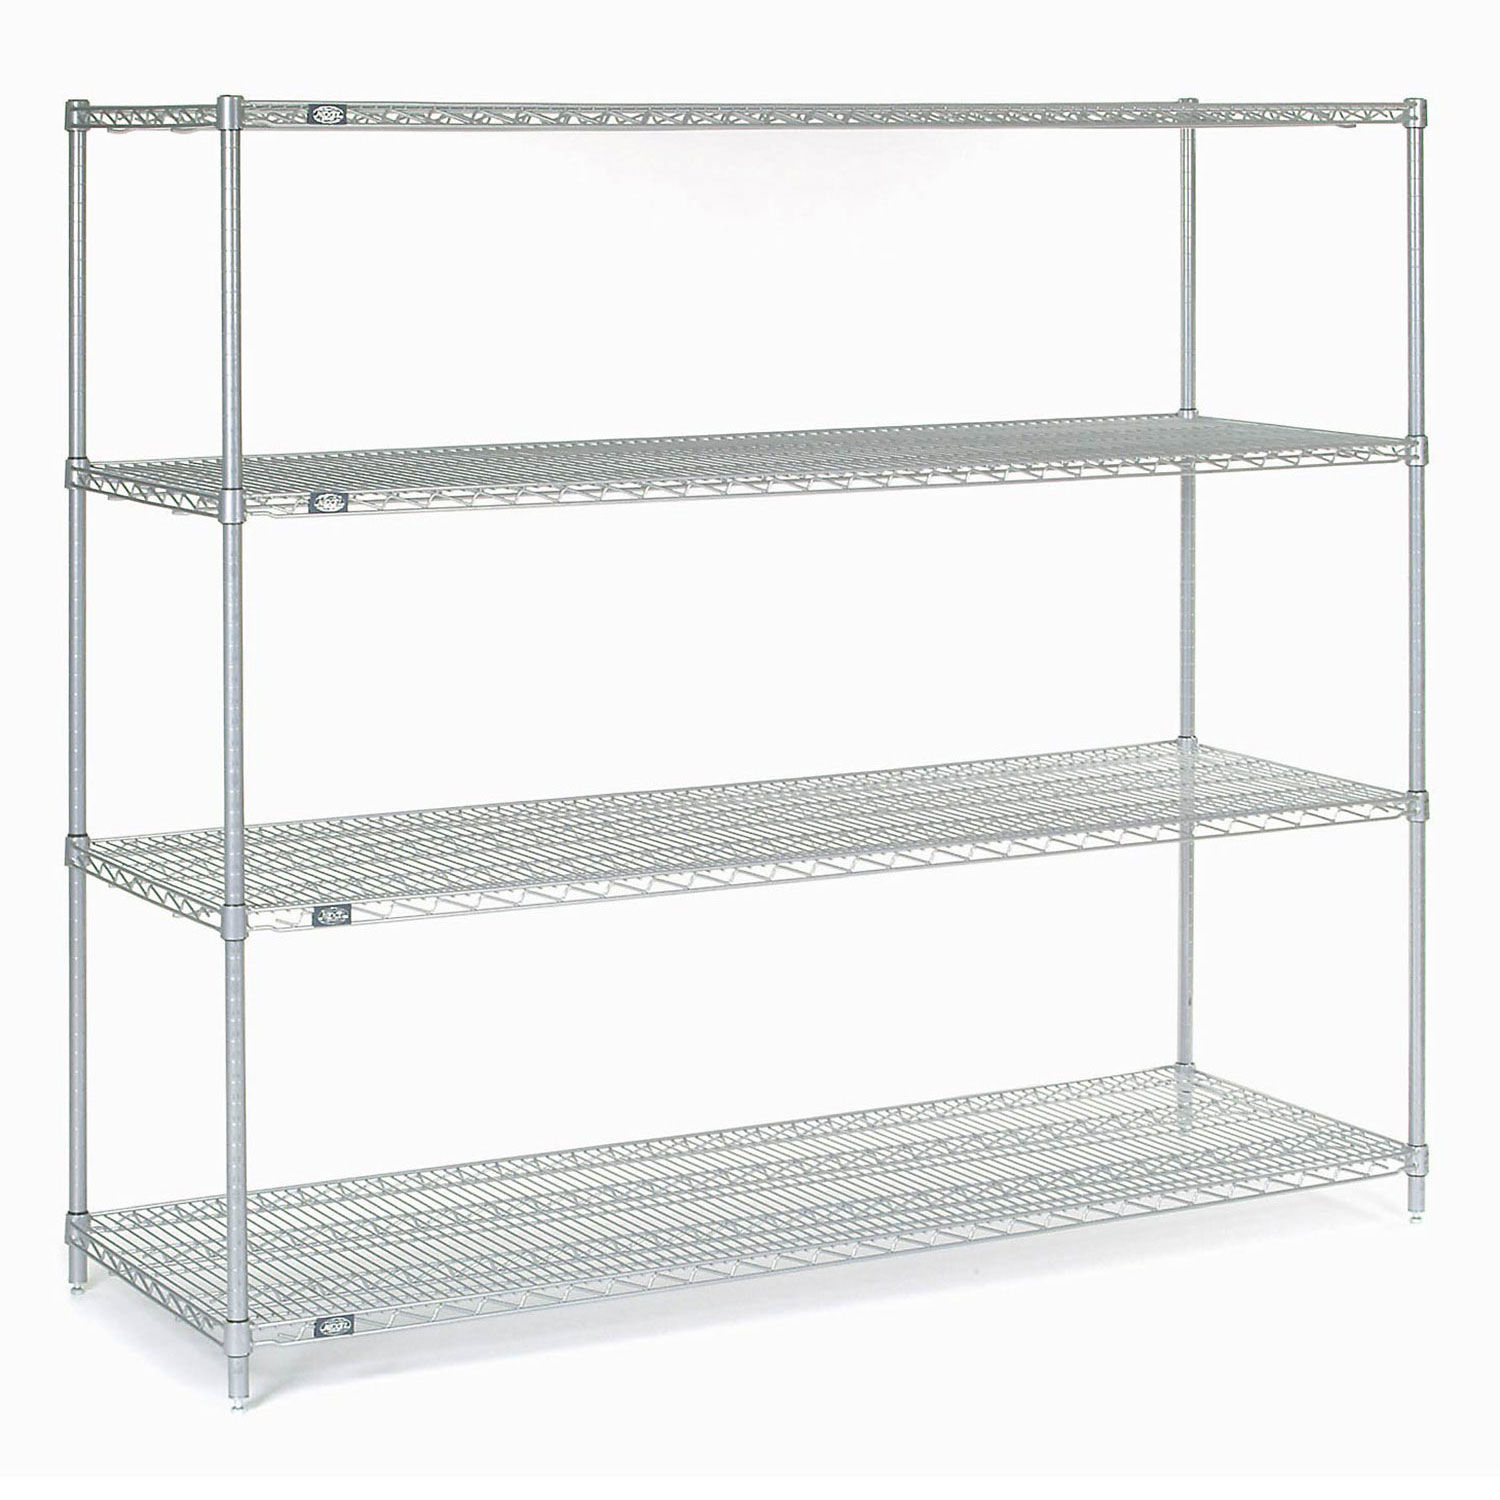 Stainless Steel Wire Shelving, 72"W x 24"D x 86"H 710552501664 | eBay Stainless Steel Wire Shelving Unit